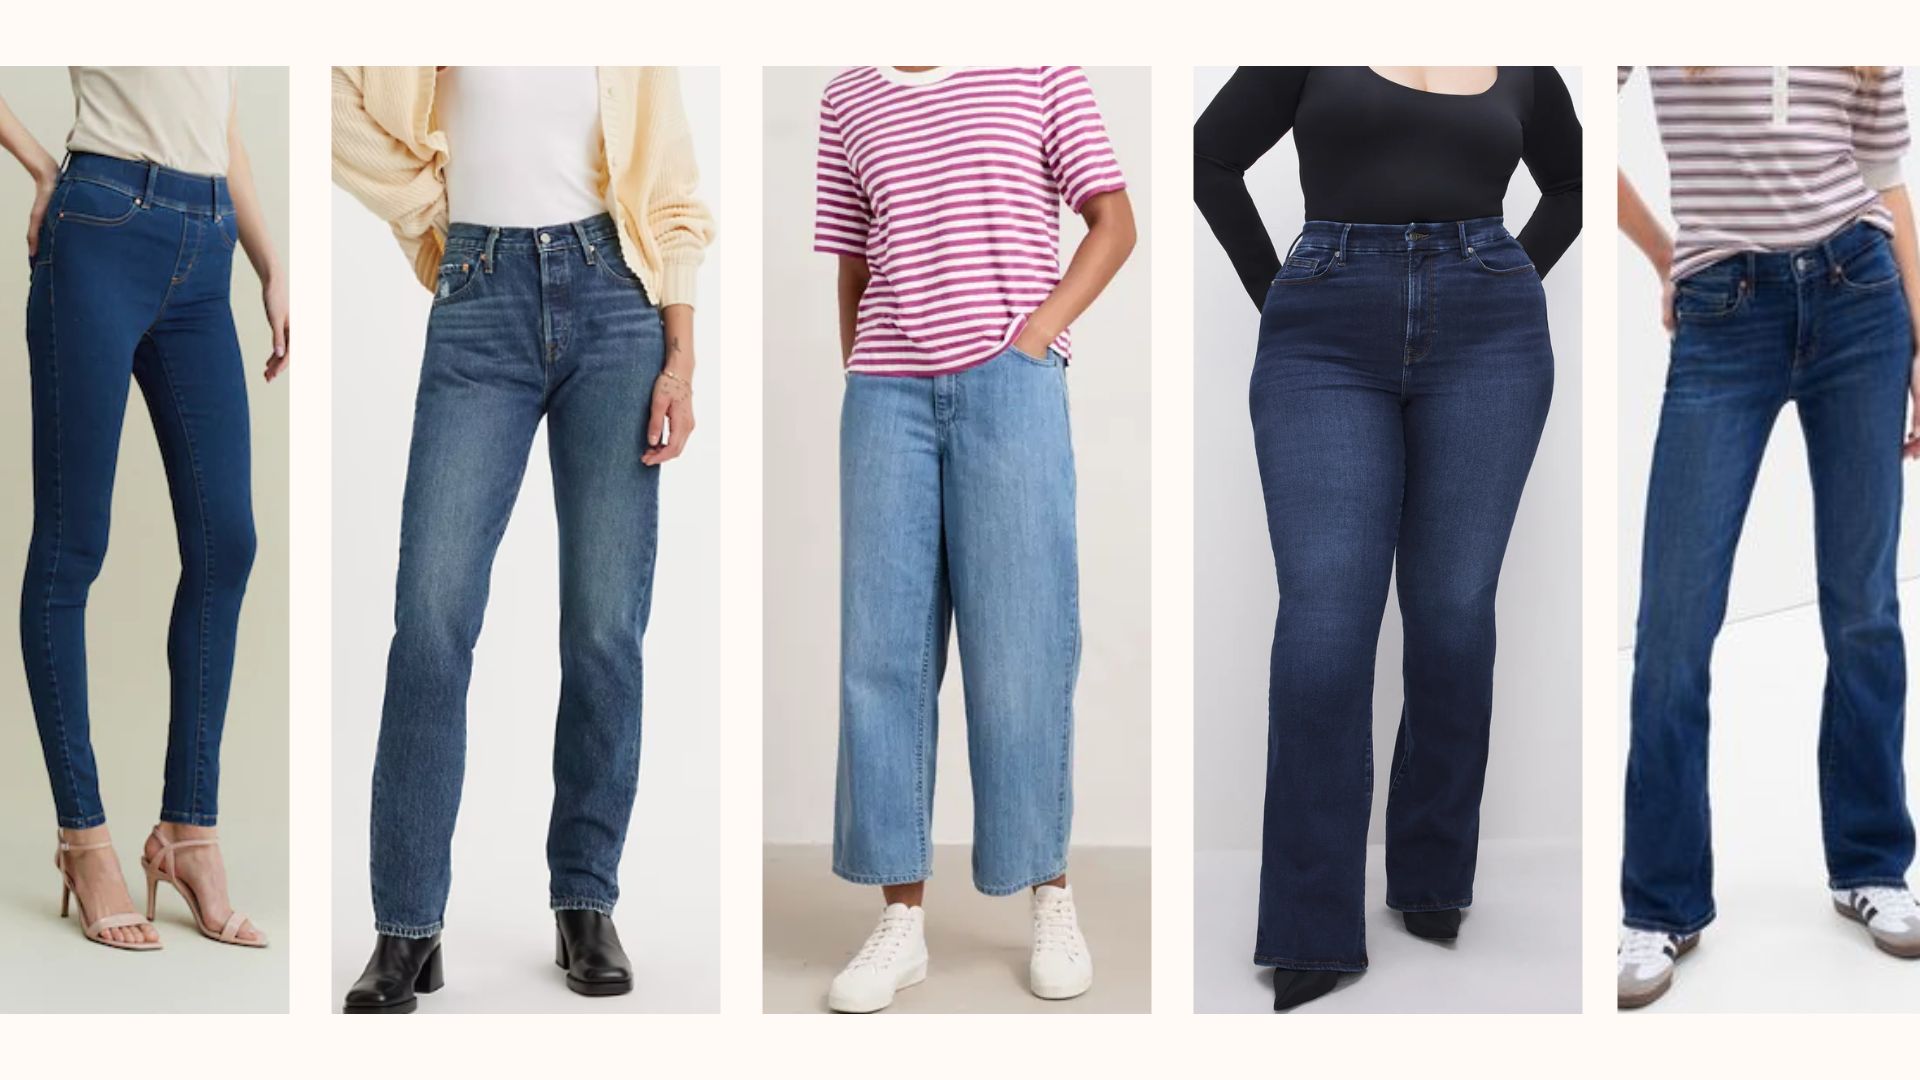 Designer Explains Why Women's Jeans Have Small Pockets